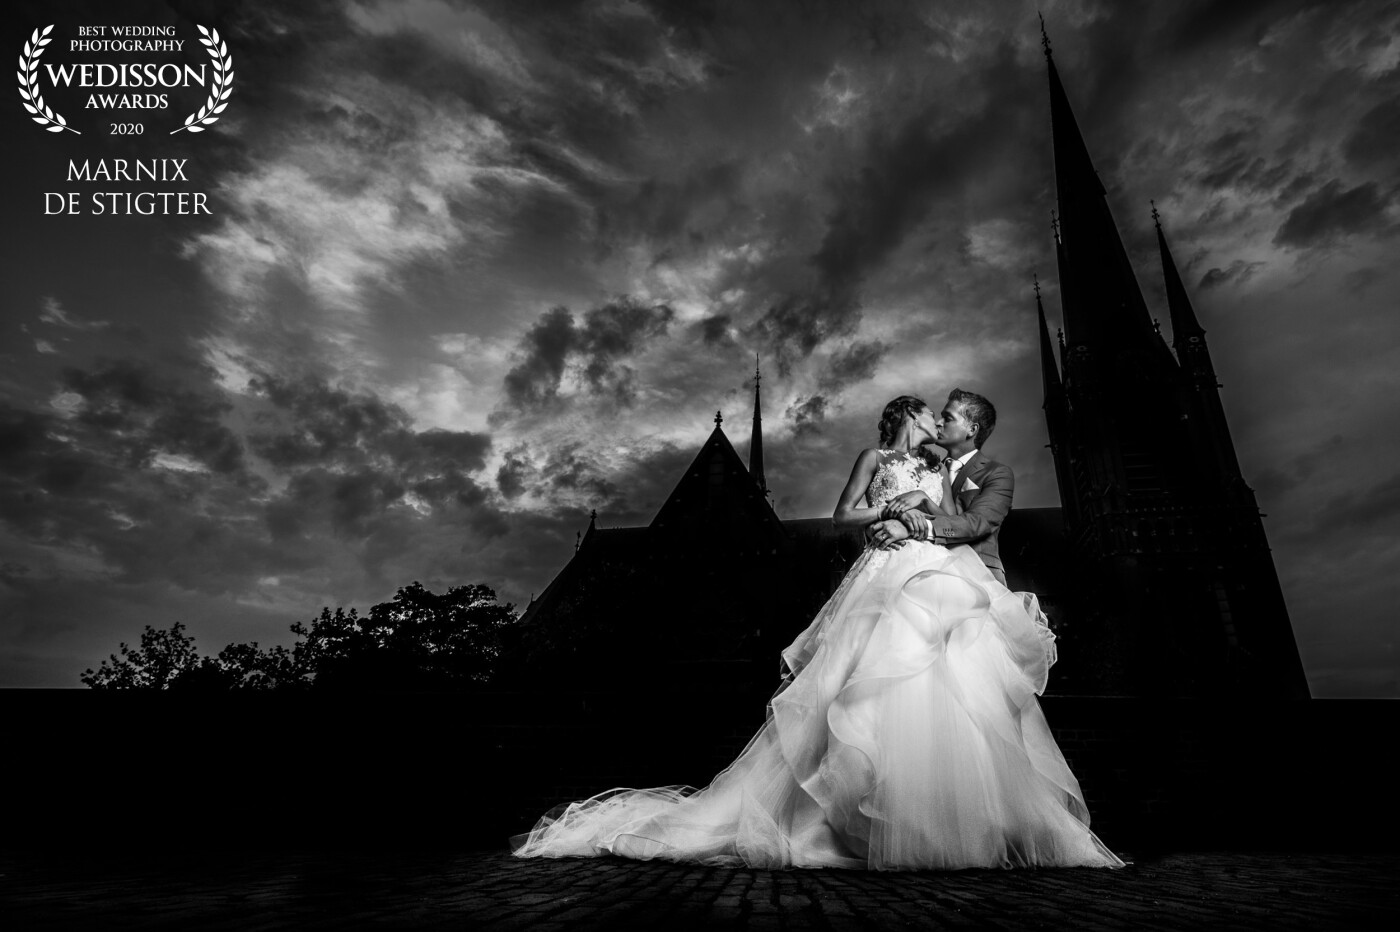 At sunset, we held a short photoshoot with this wedding couple. Taken in the city center of Woerden in the middle of the Netherlands, the light was just perfect for a beautiful silhouette shot with the church in the background.